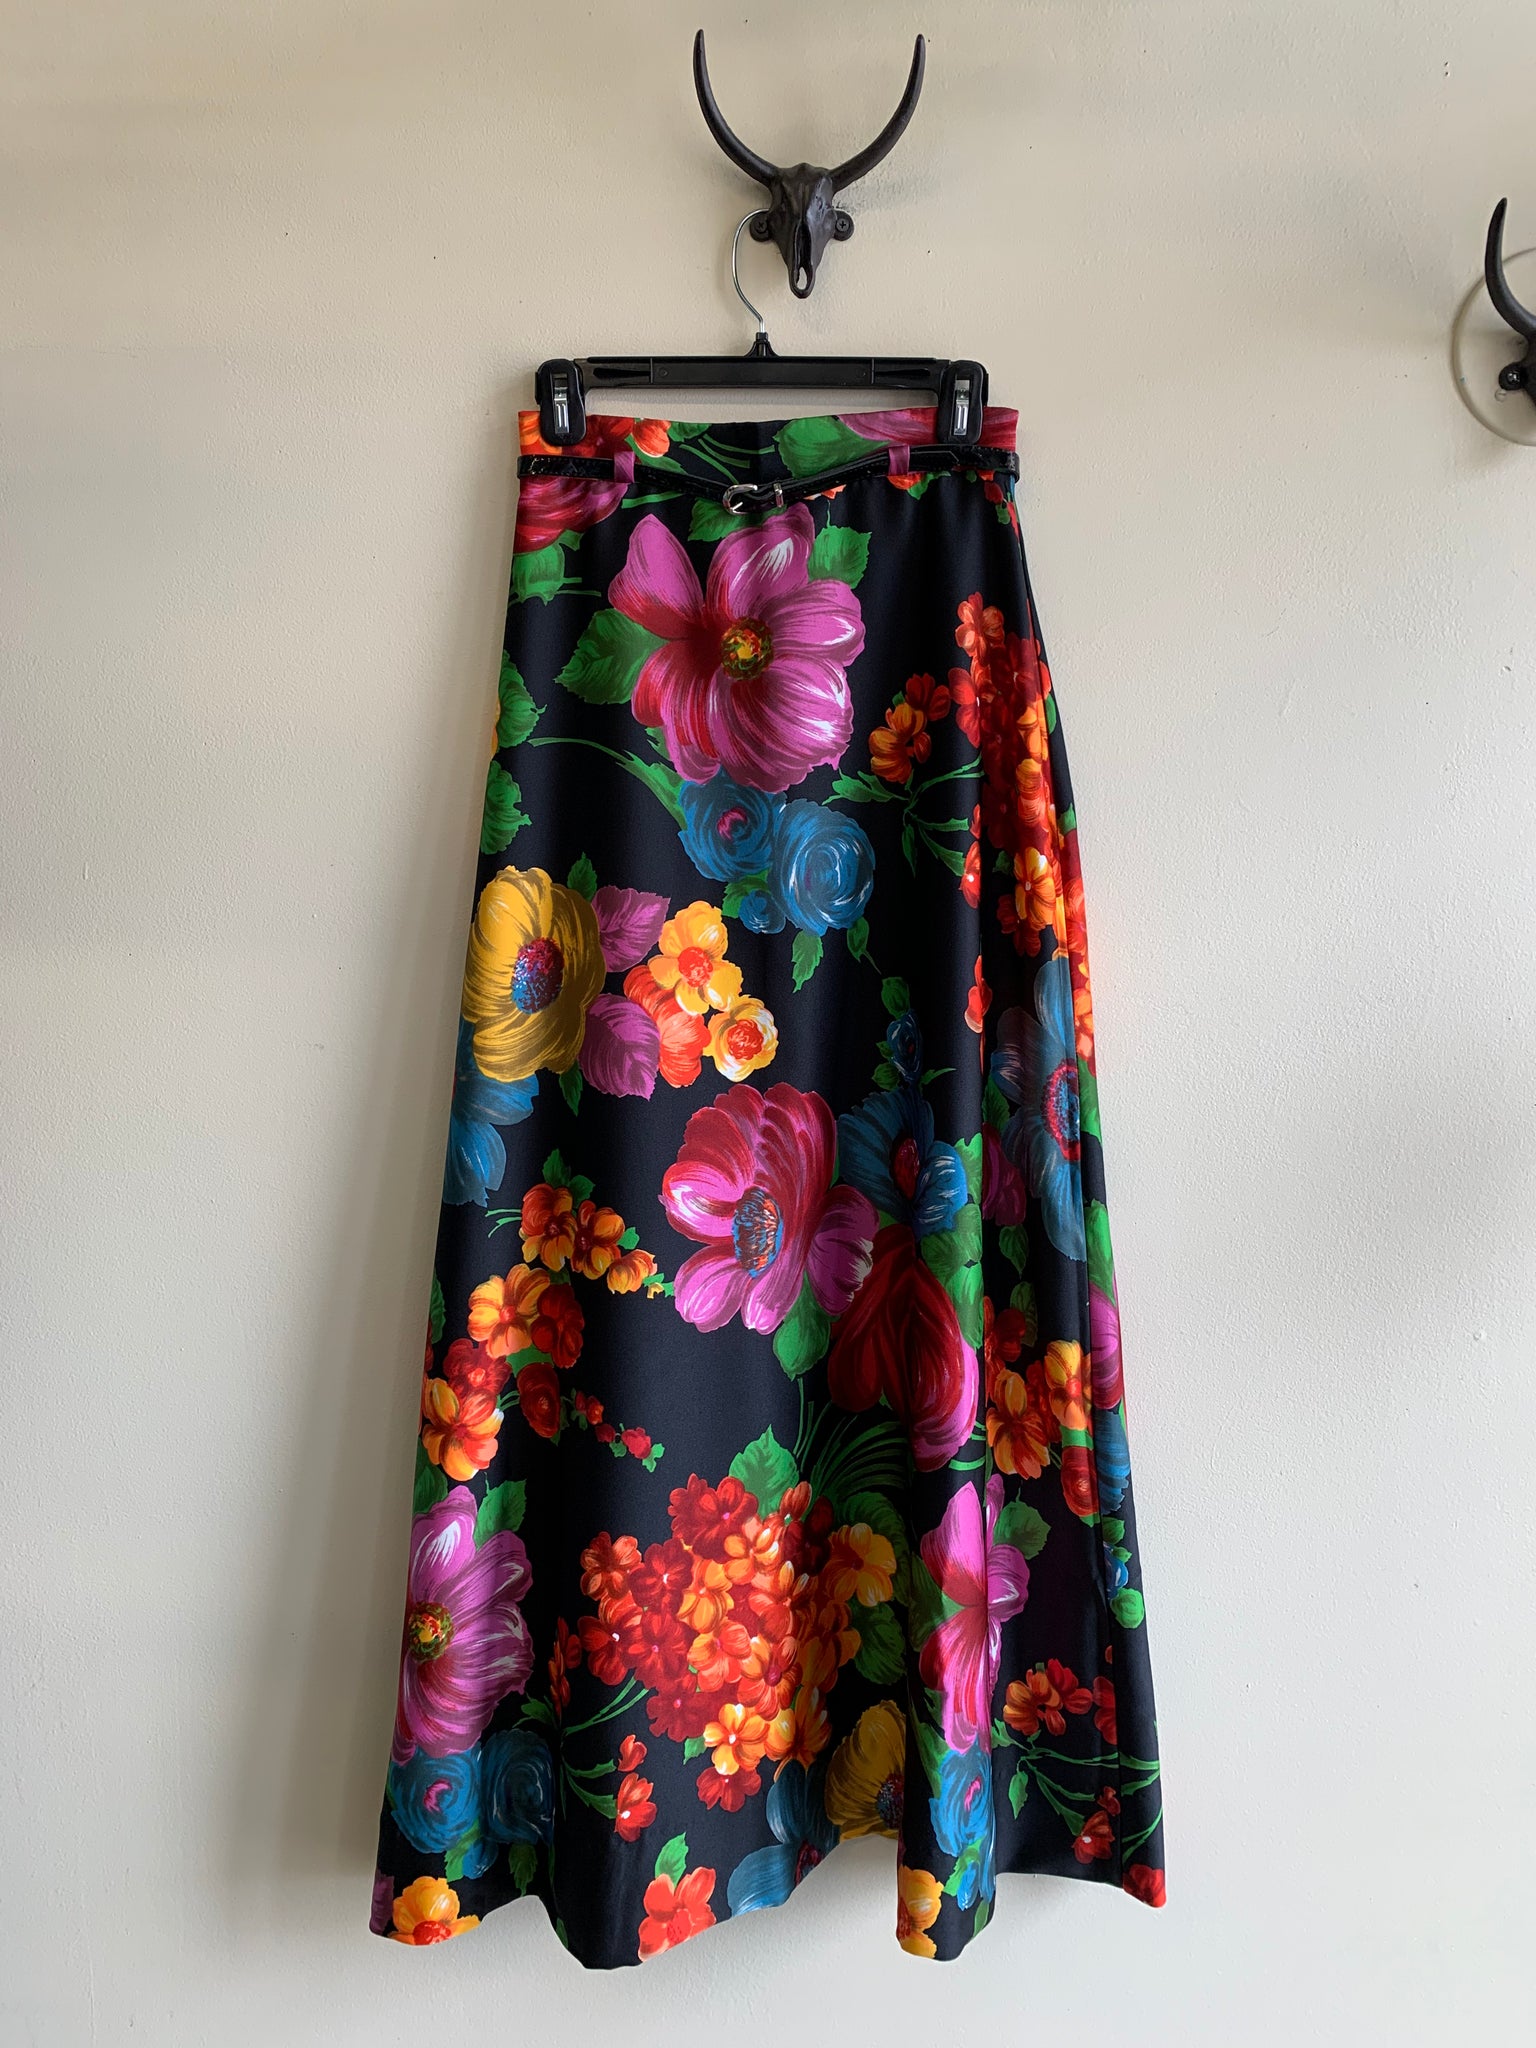 70s Style-Rite Floral Maxi Skirt - S